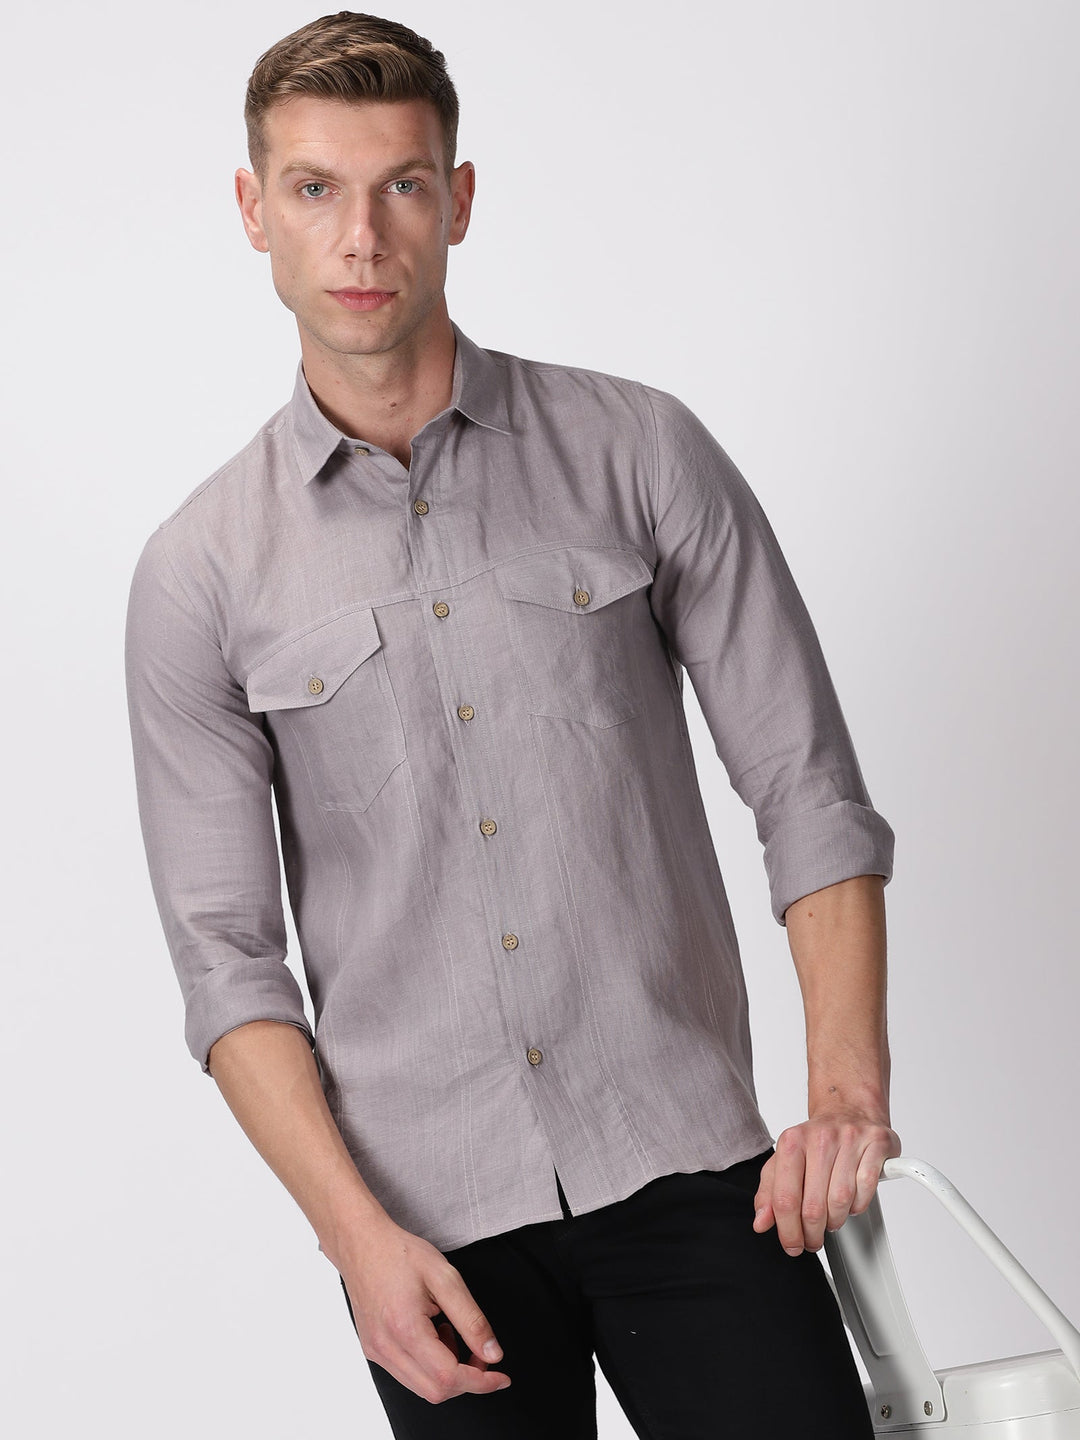 Thomas - Pure Linen Double Pocket Full Sleeve Shirt - Cement Grey | Rescue